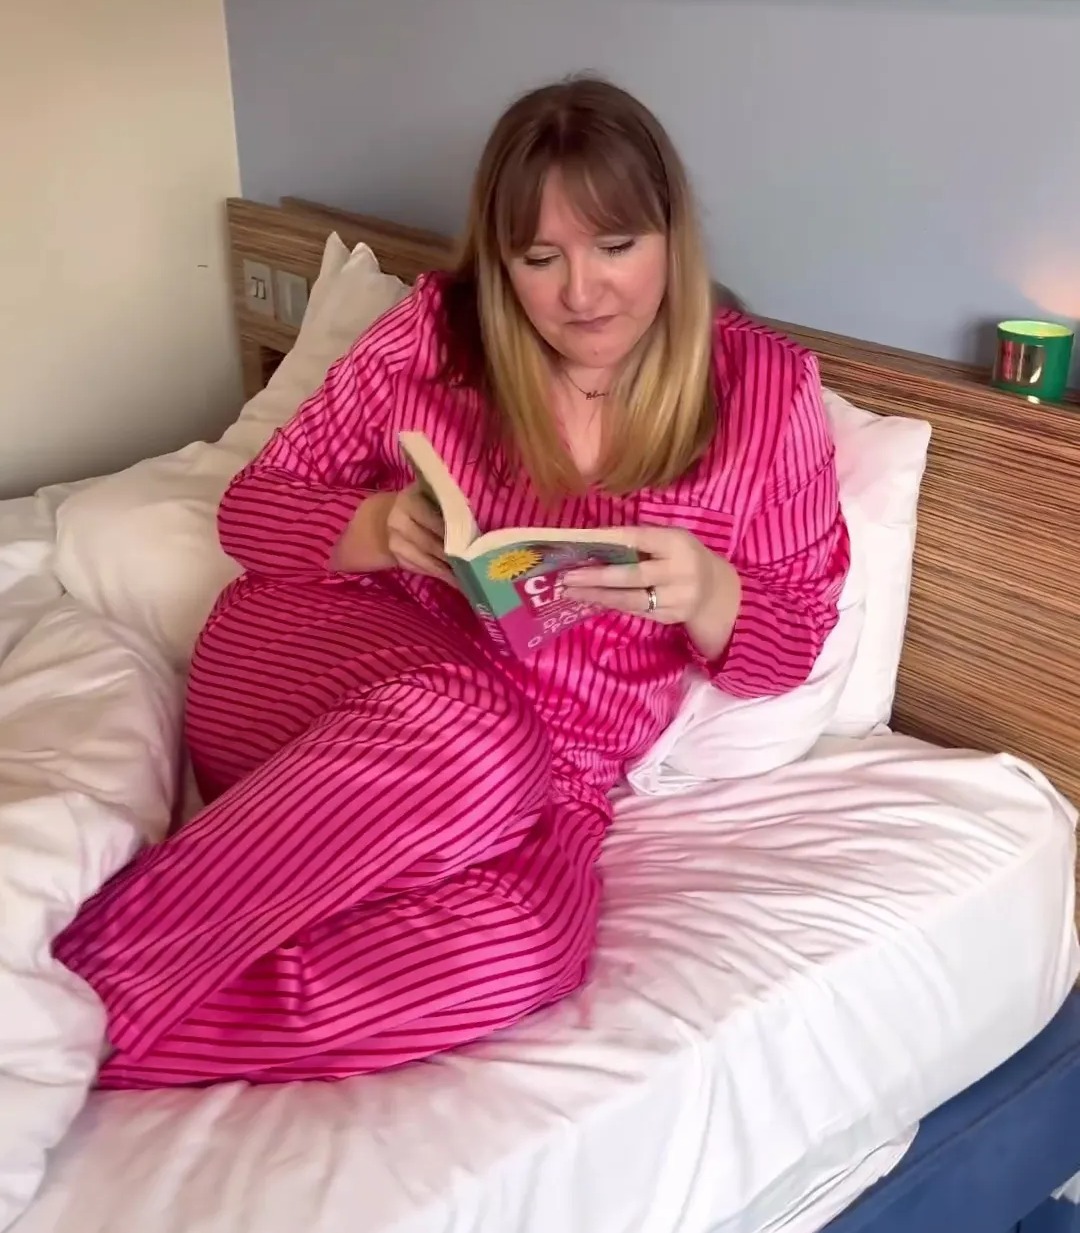 Alison got changed into her cosy pyjamas and got stuck into a book